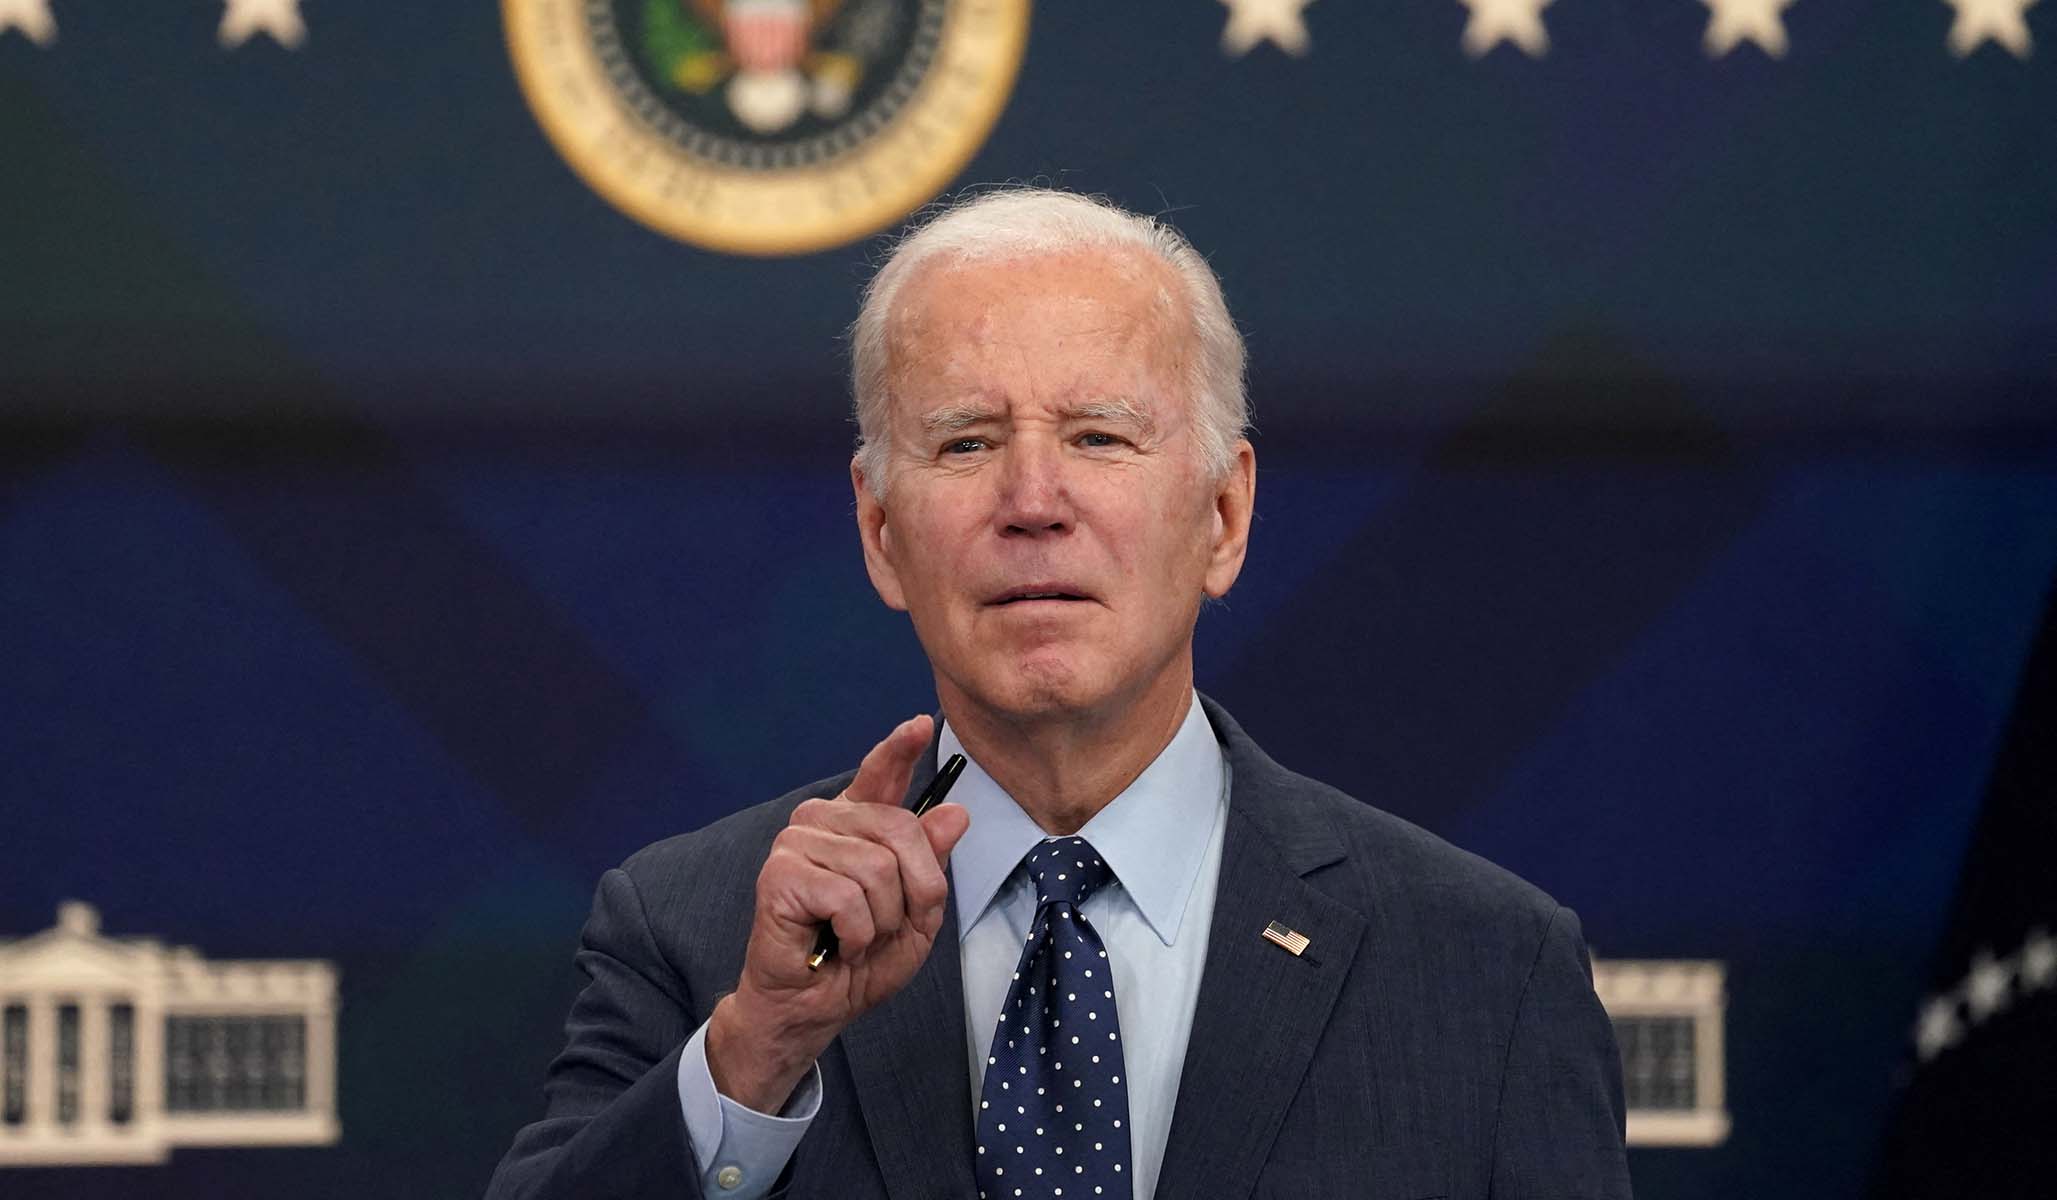 Biden Signs Executive Order to Root Out Systemic Racism from Federa...